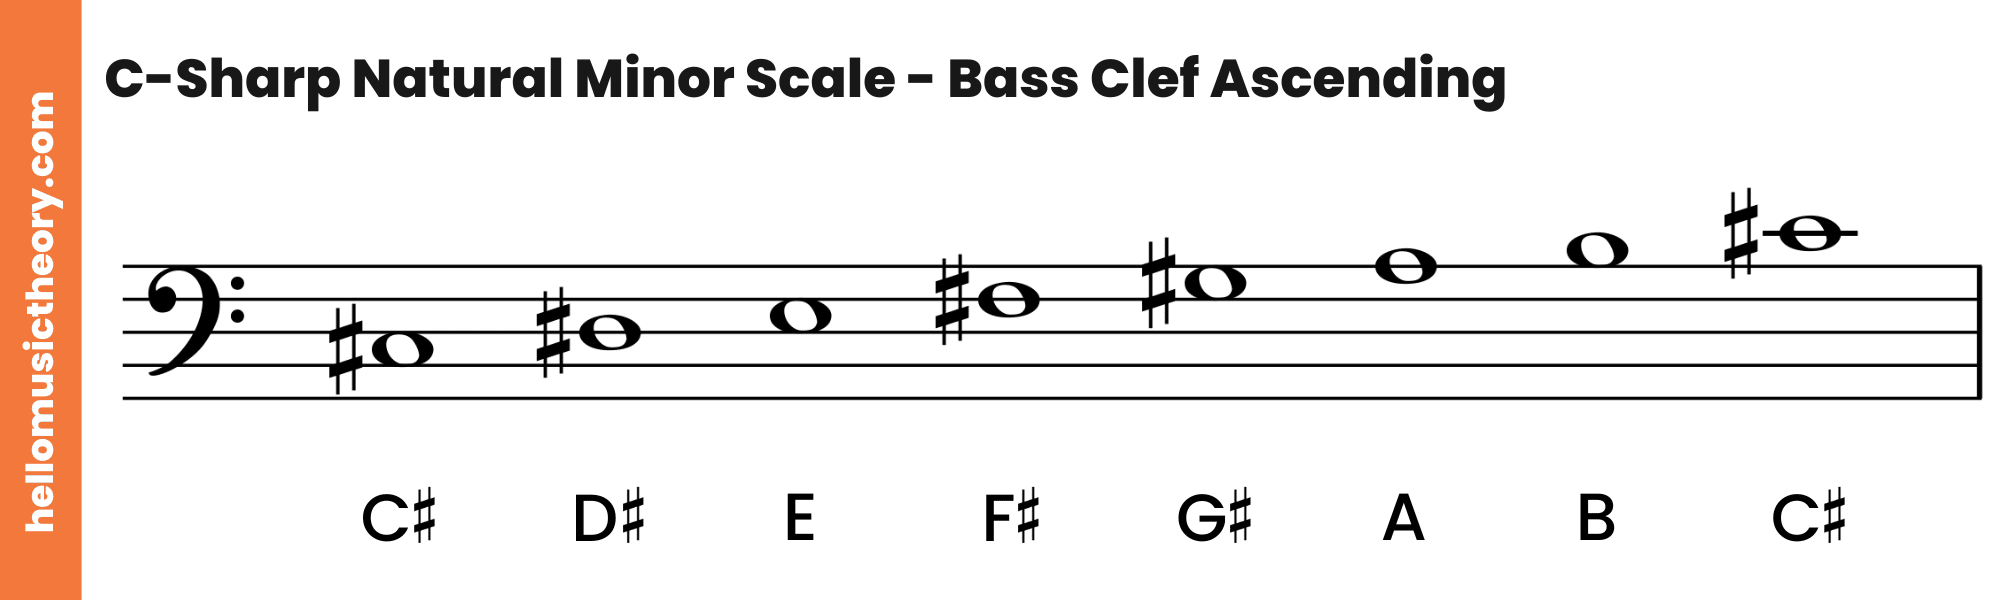 C-Sharp Natural Minor Scale Bass Clef Ascending